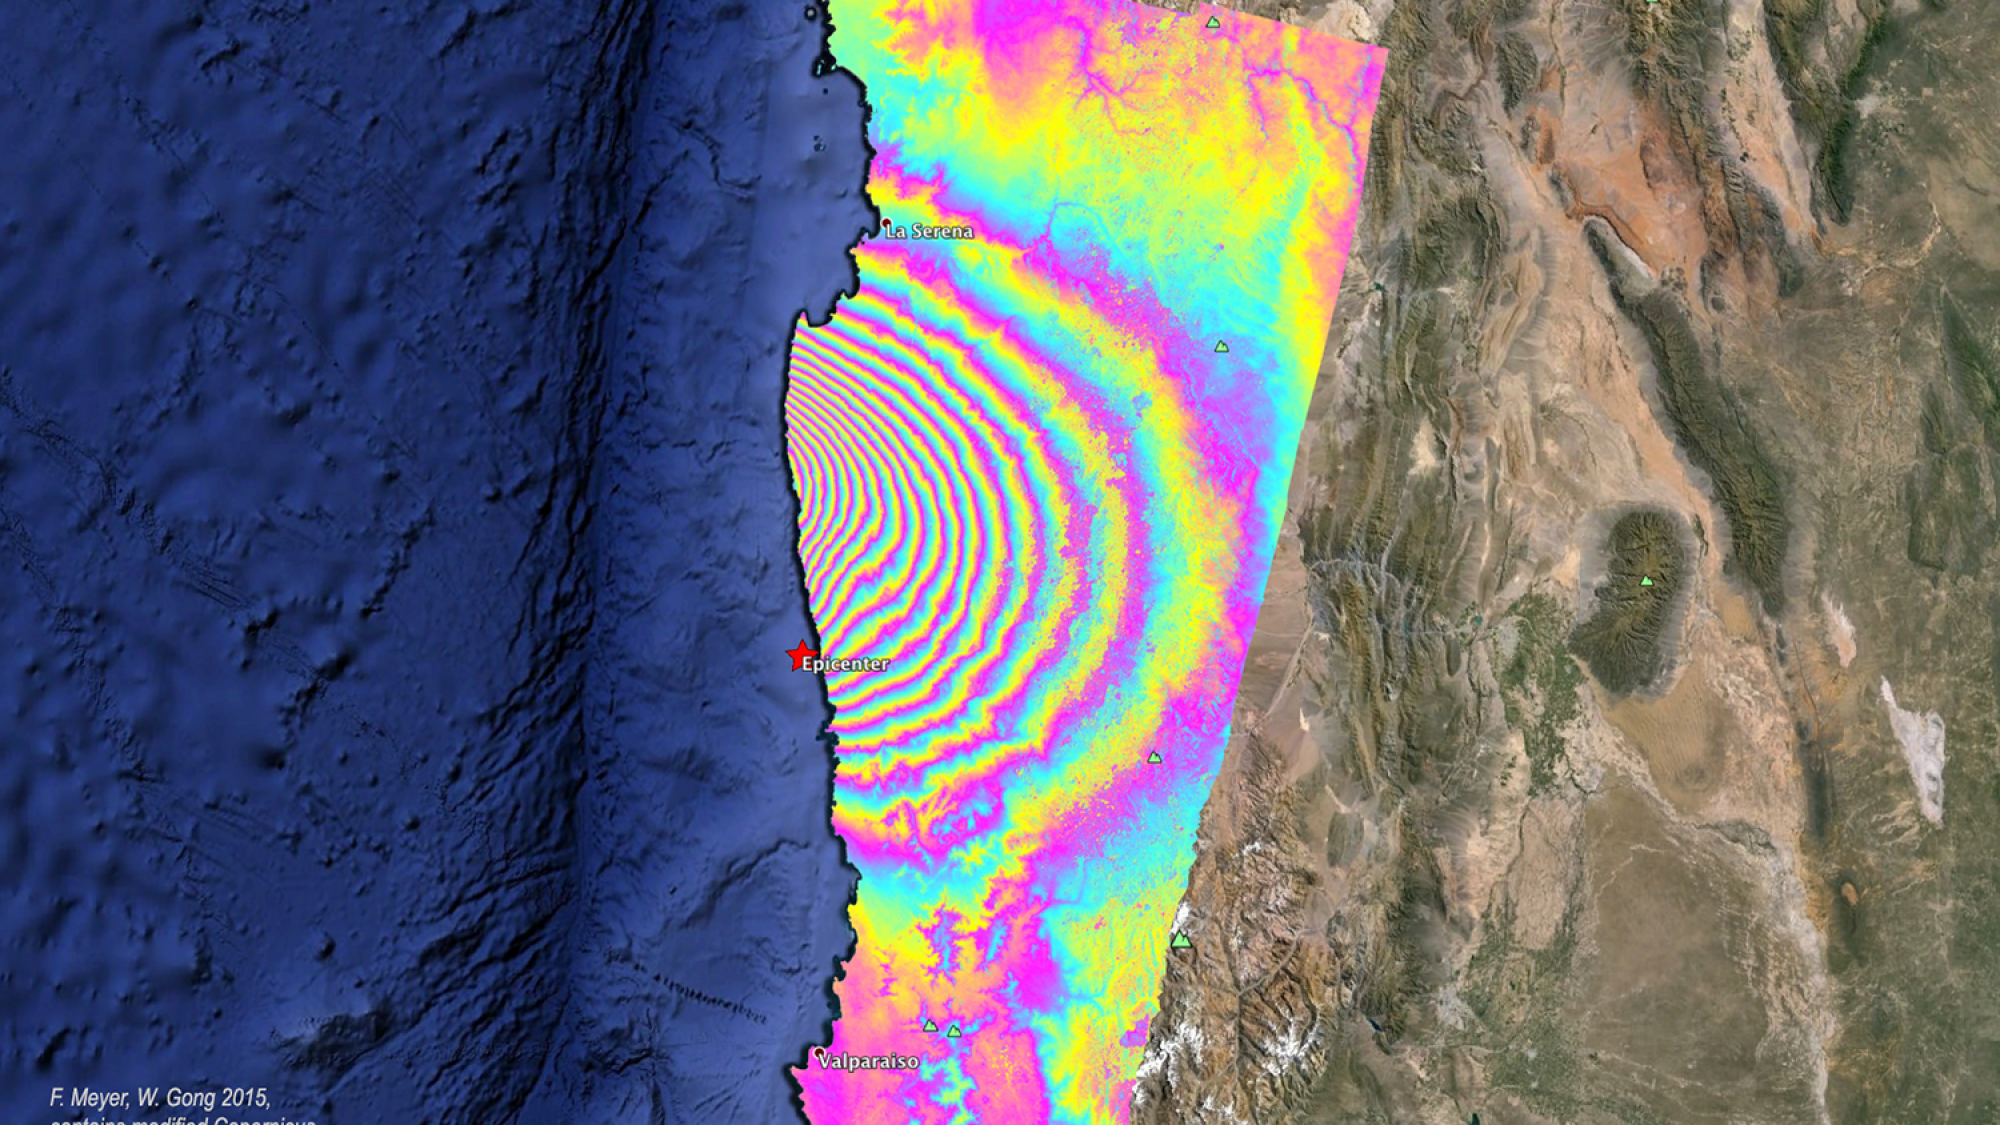 Within days after the 16 September 2015, 8.3 M earthquake in Chile, ASF DAAC scientists used Sentinel-1A acquisitions before and after the quake to create the image at right. The interferogram was unwrapped and rewrapped to a lower fringe rate to improve visual analysis. One fringe (one complete color cycle) corresponds to a relative line-of-sight motion of 8.5 cm. The image is combined with a Landsat image in Google Earth (© 2015 Google). Image credit: F. Meyer, W. Gong 2015; contains modified Copernicus Sentinel data 2015.